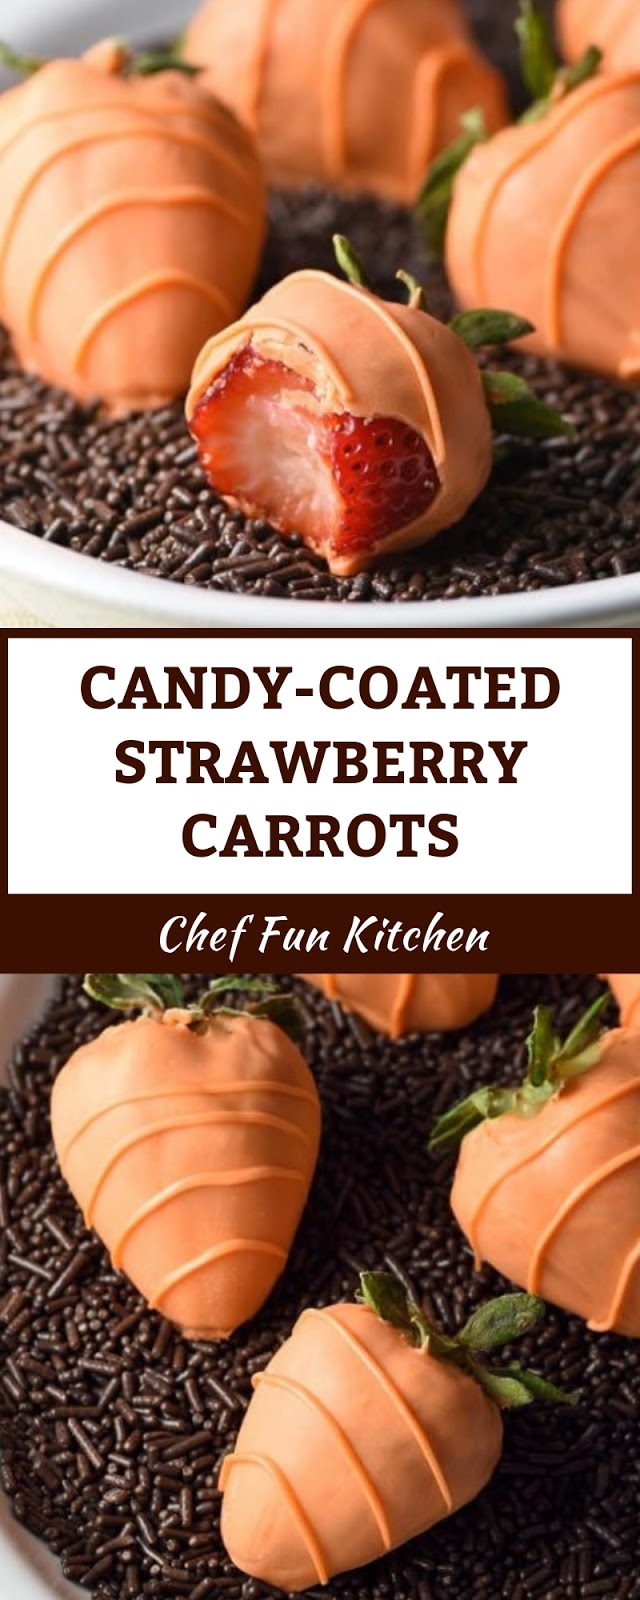 CANDY-COATED STRAWBERRY CARROTS